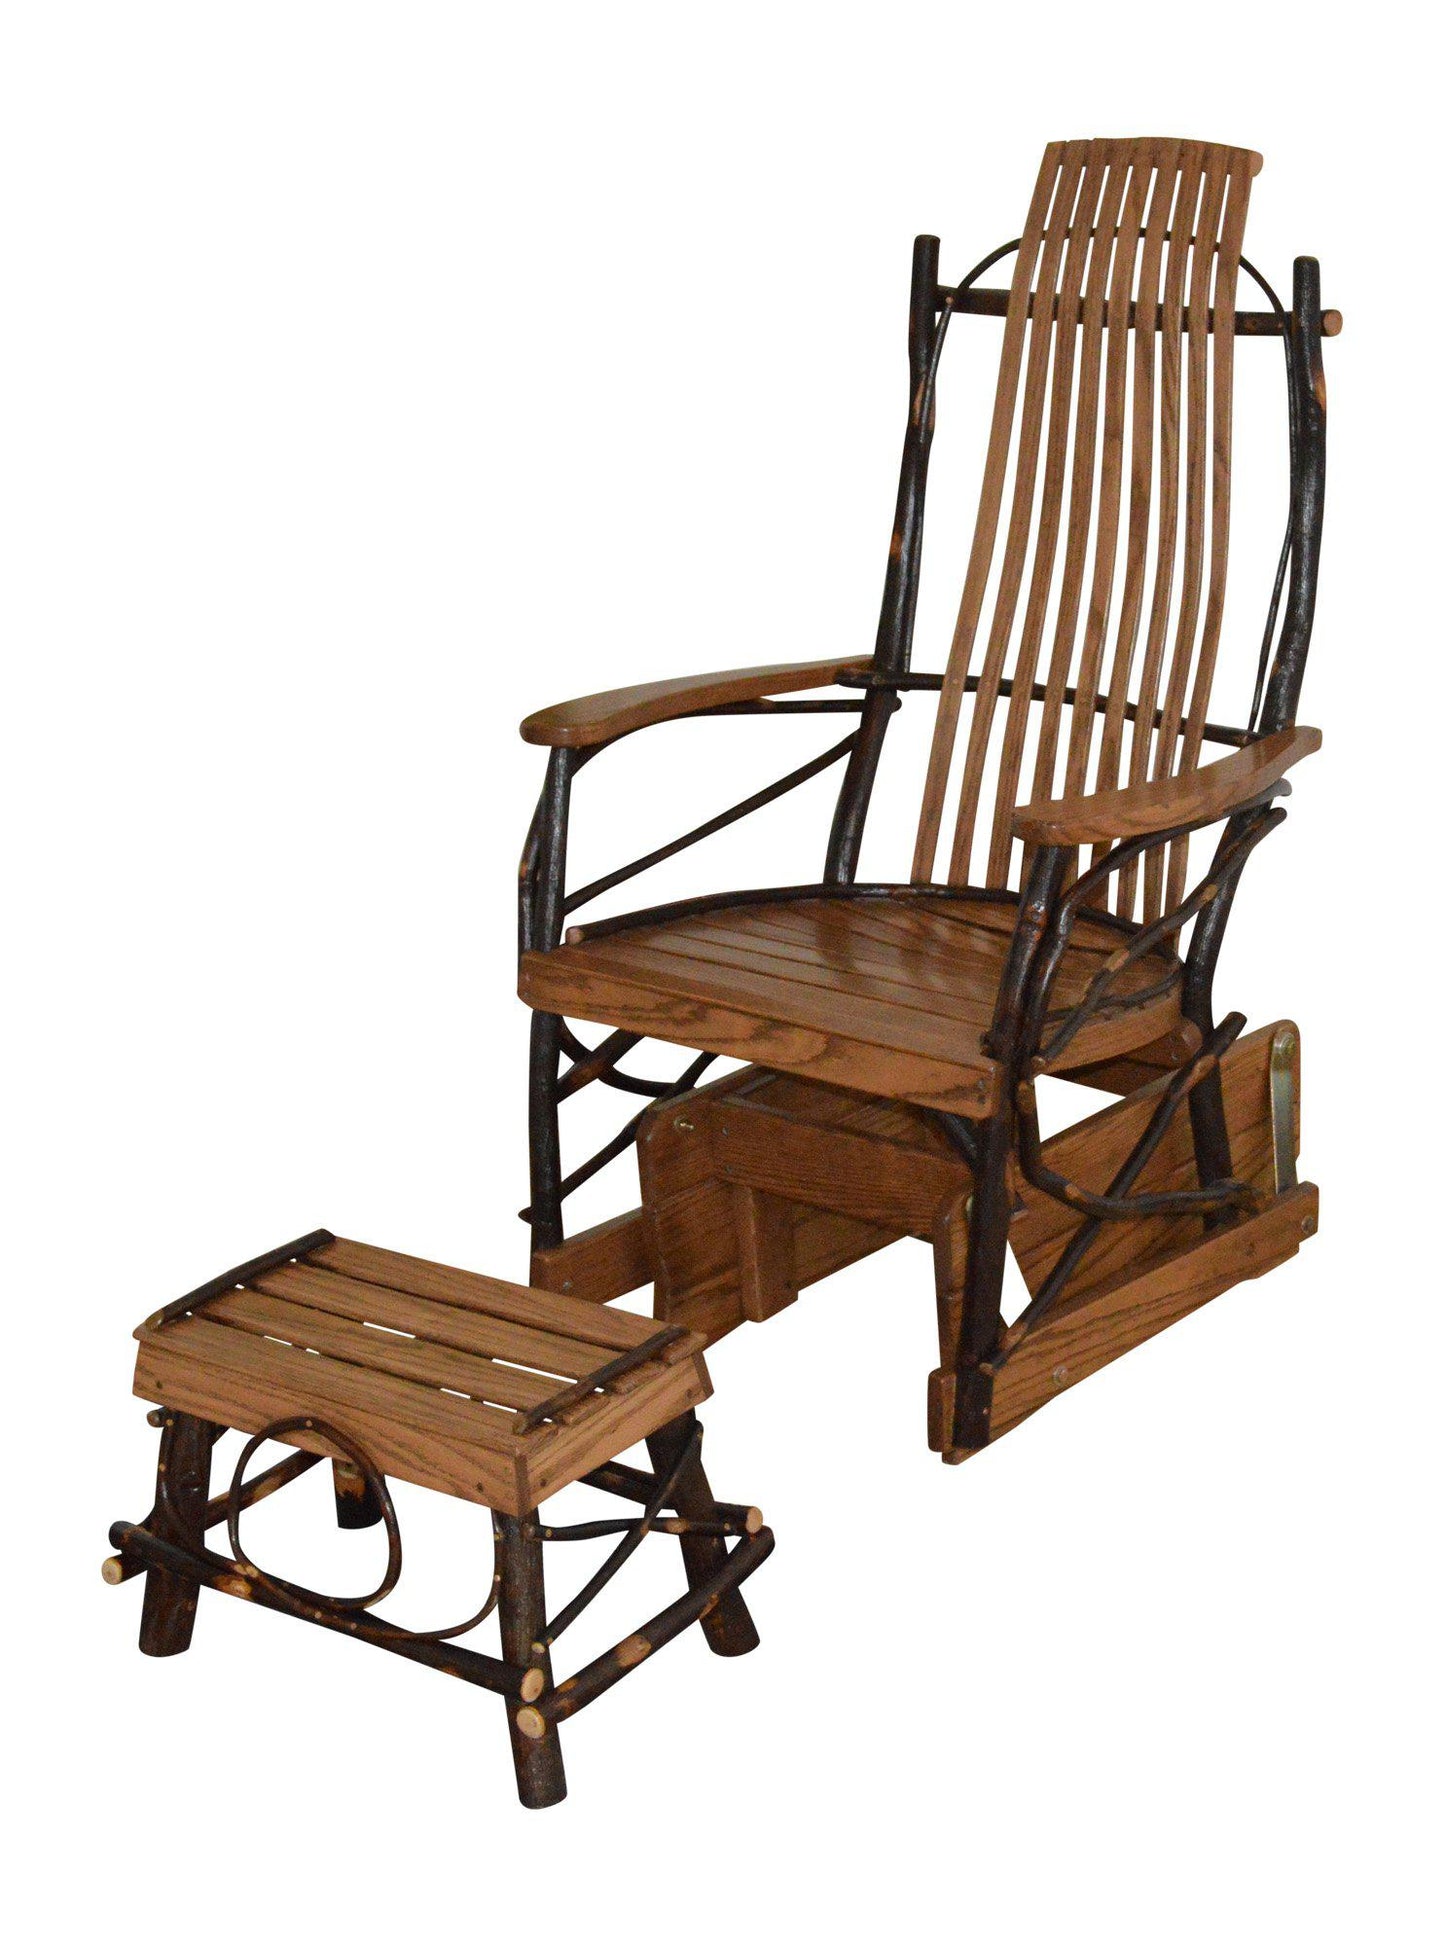 A&L Furniture Co. Amish Bentwood Hickory Glider Rocker with Foot Stool Set - LEAD TIME TO SHIP 10 BUSINESS DAYS